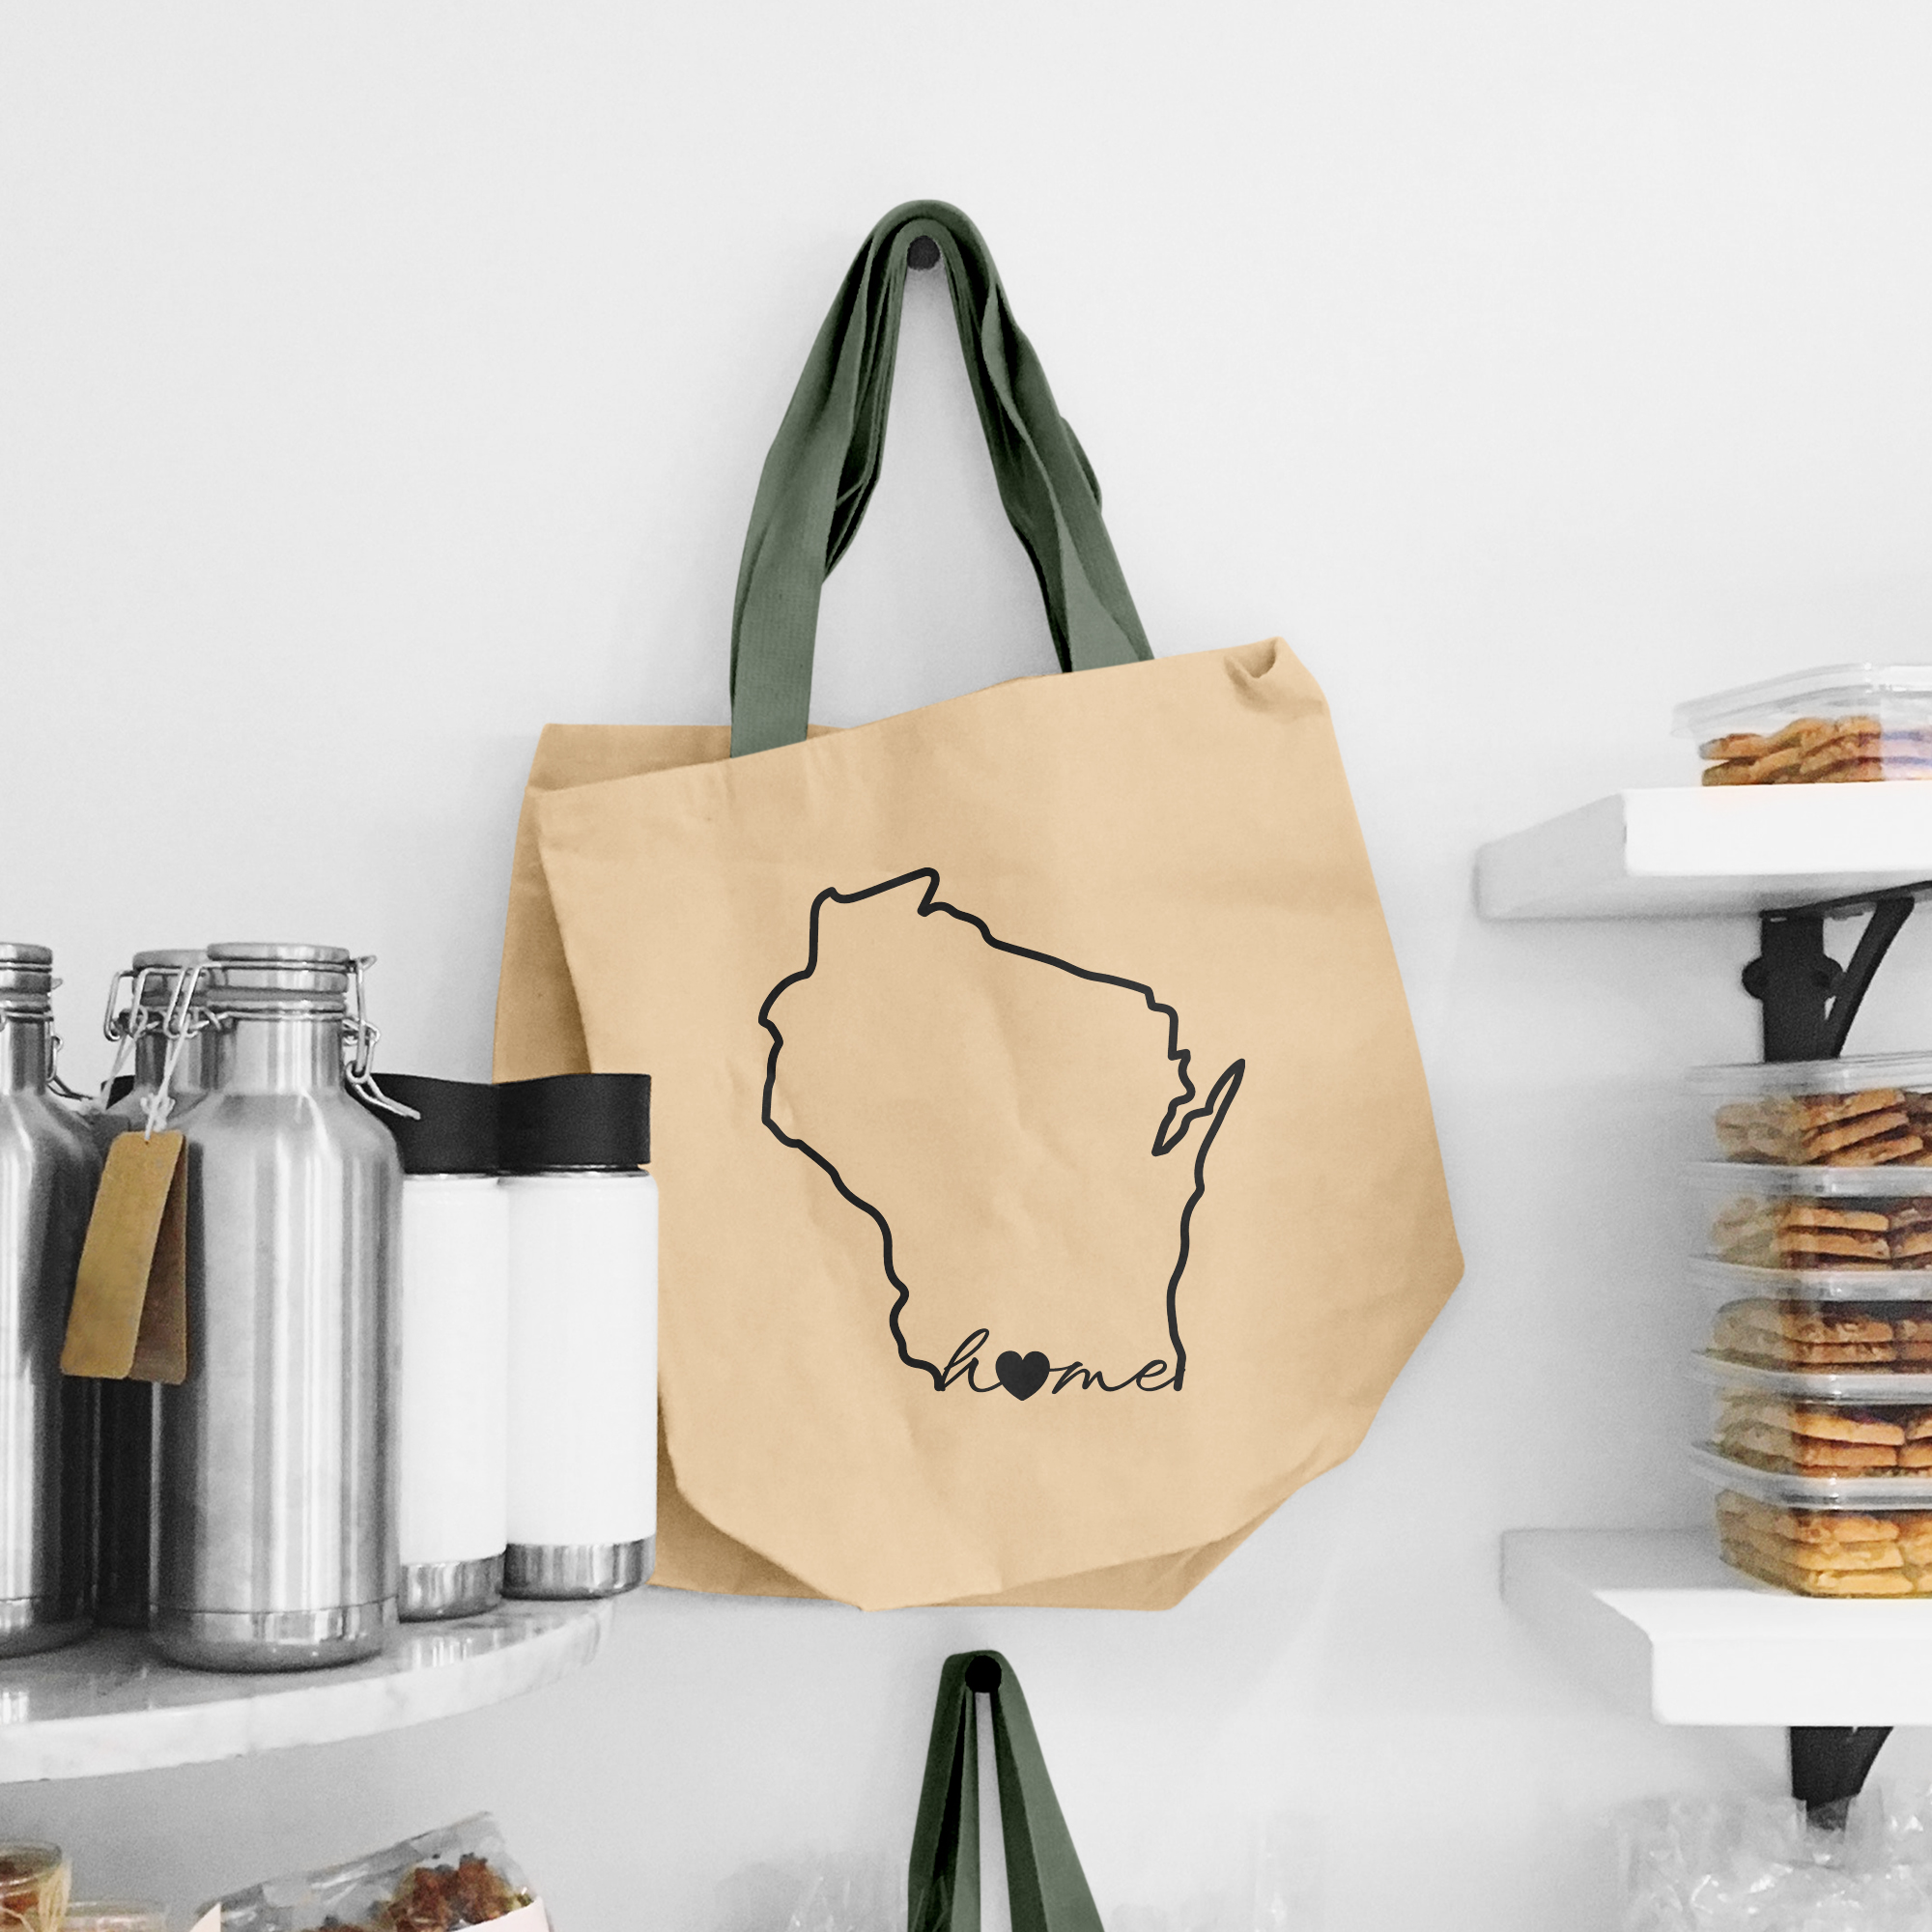 Black illustration of map of Wisconsin on the beige shopping bag with dirty green handle.